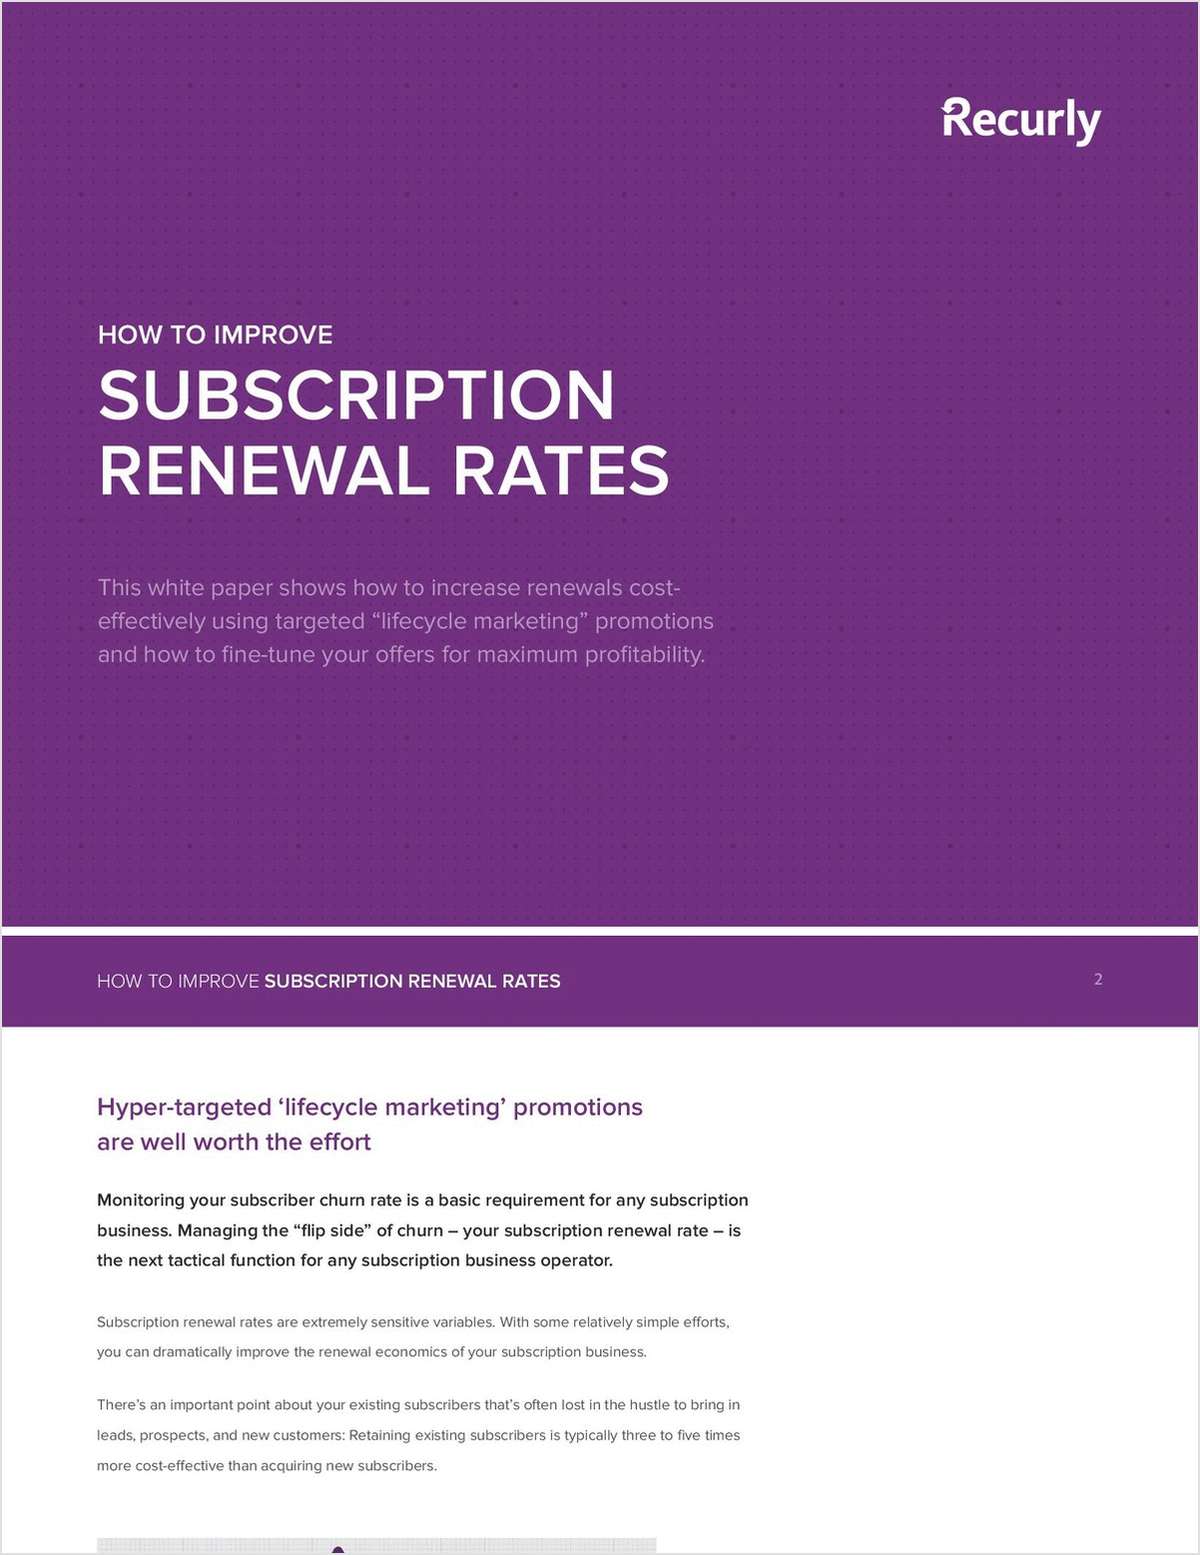 How to Improve Subscription Renewal Rates